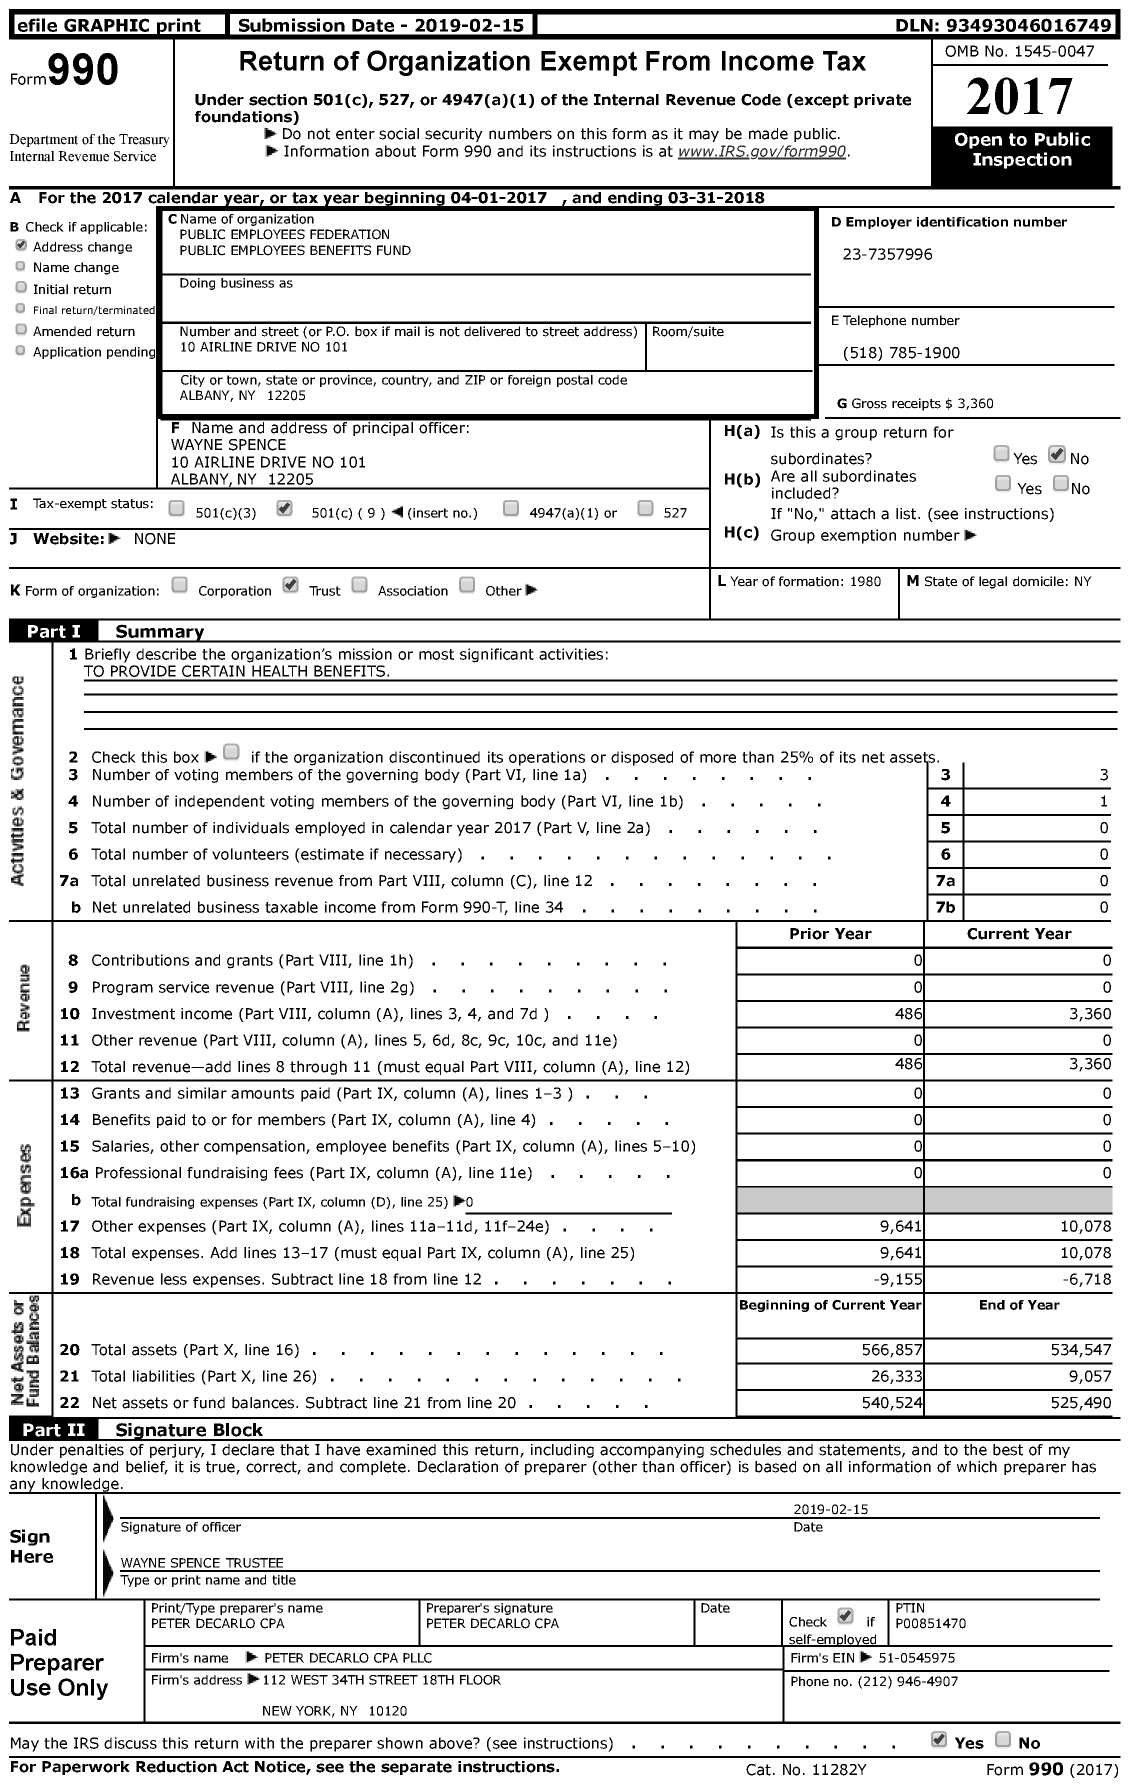 Image of first page of 2017 Form 990 for Public Employees Federation Public Employees Benefits Fund